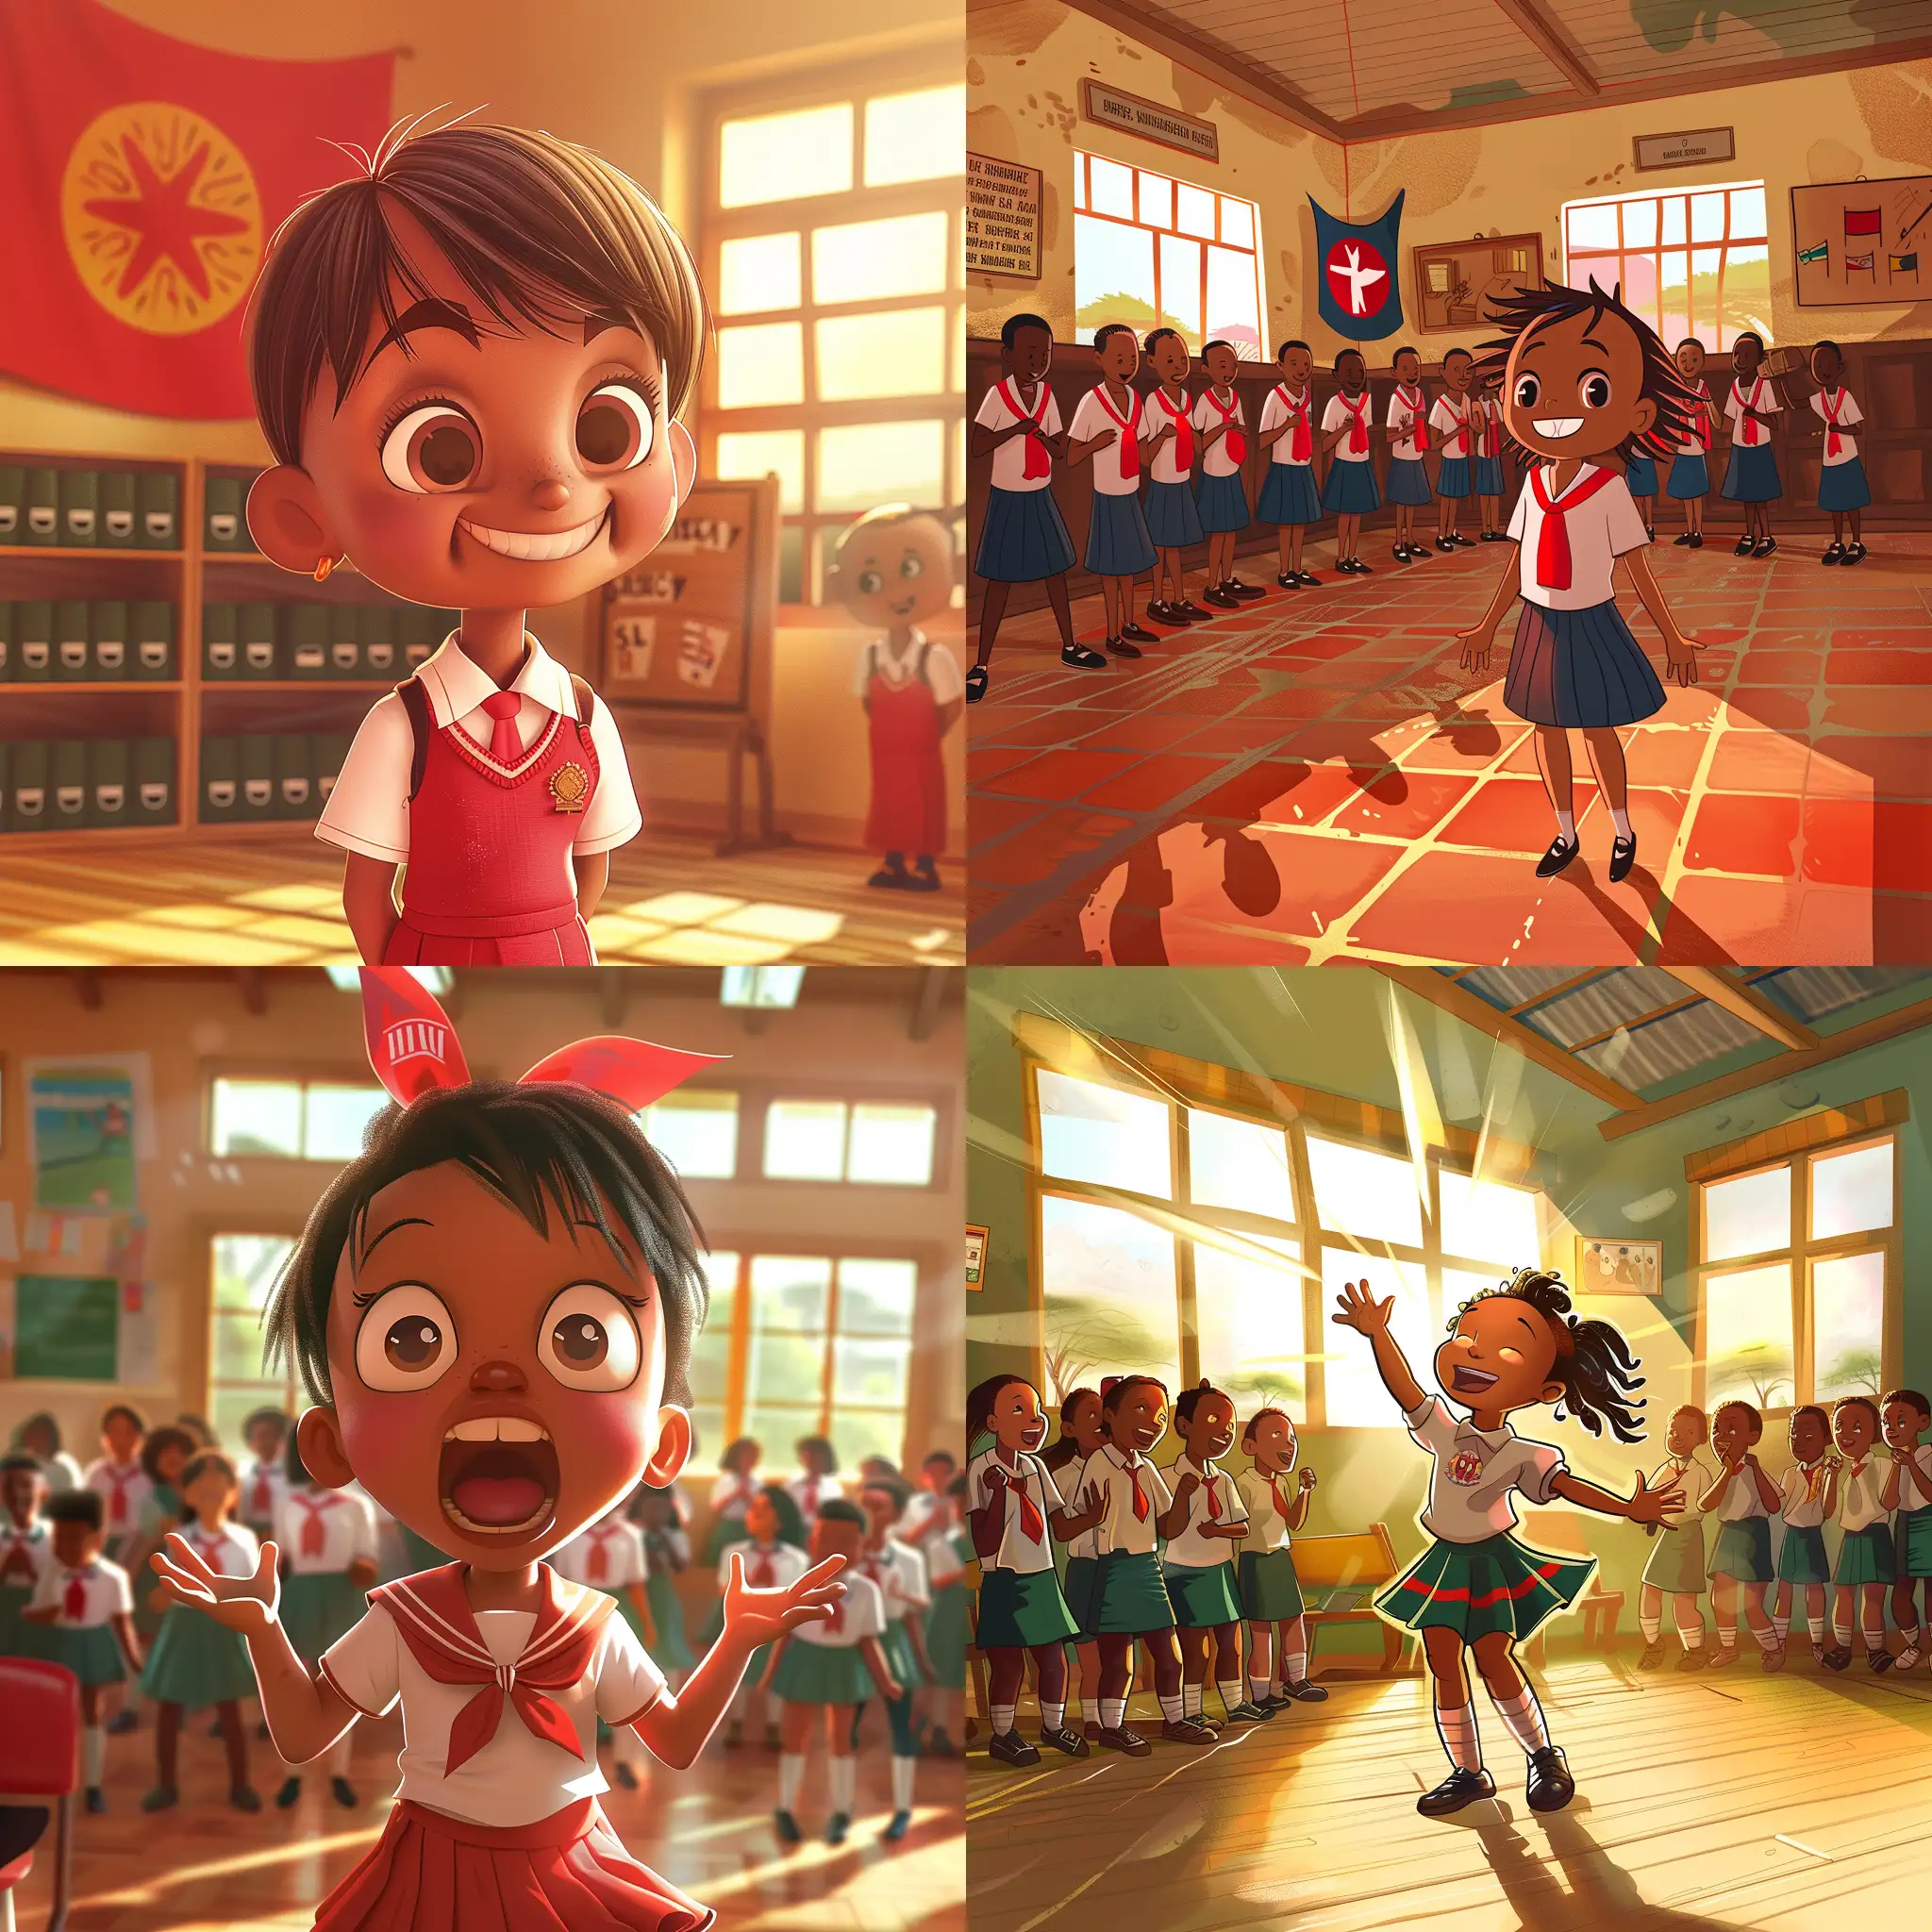 sunny morning, a bright and curious little girl, 10 years, on her daily adventures, in school, lively assembly, where the students sang the national anthem with pride and recited poems, setting in Kenya, cartoon.